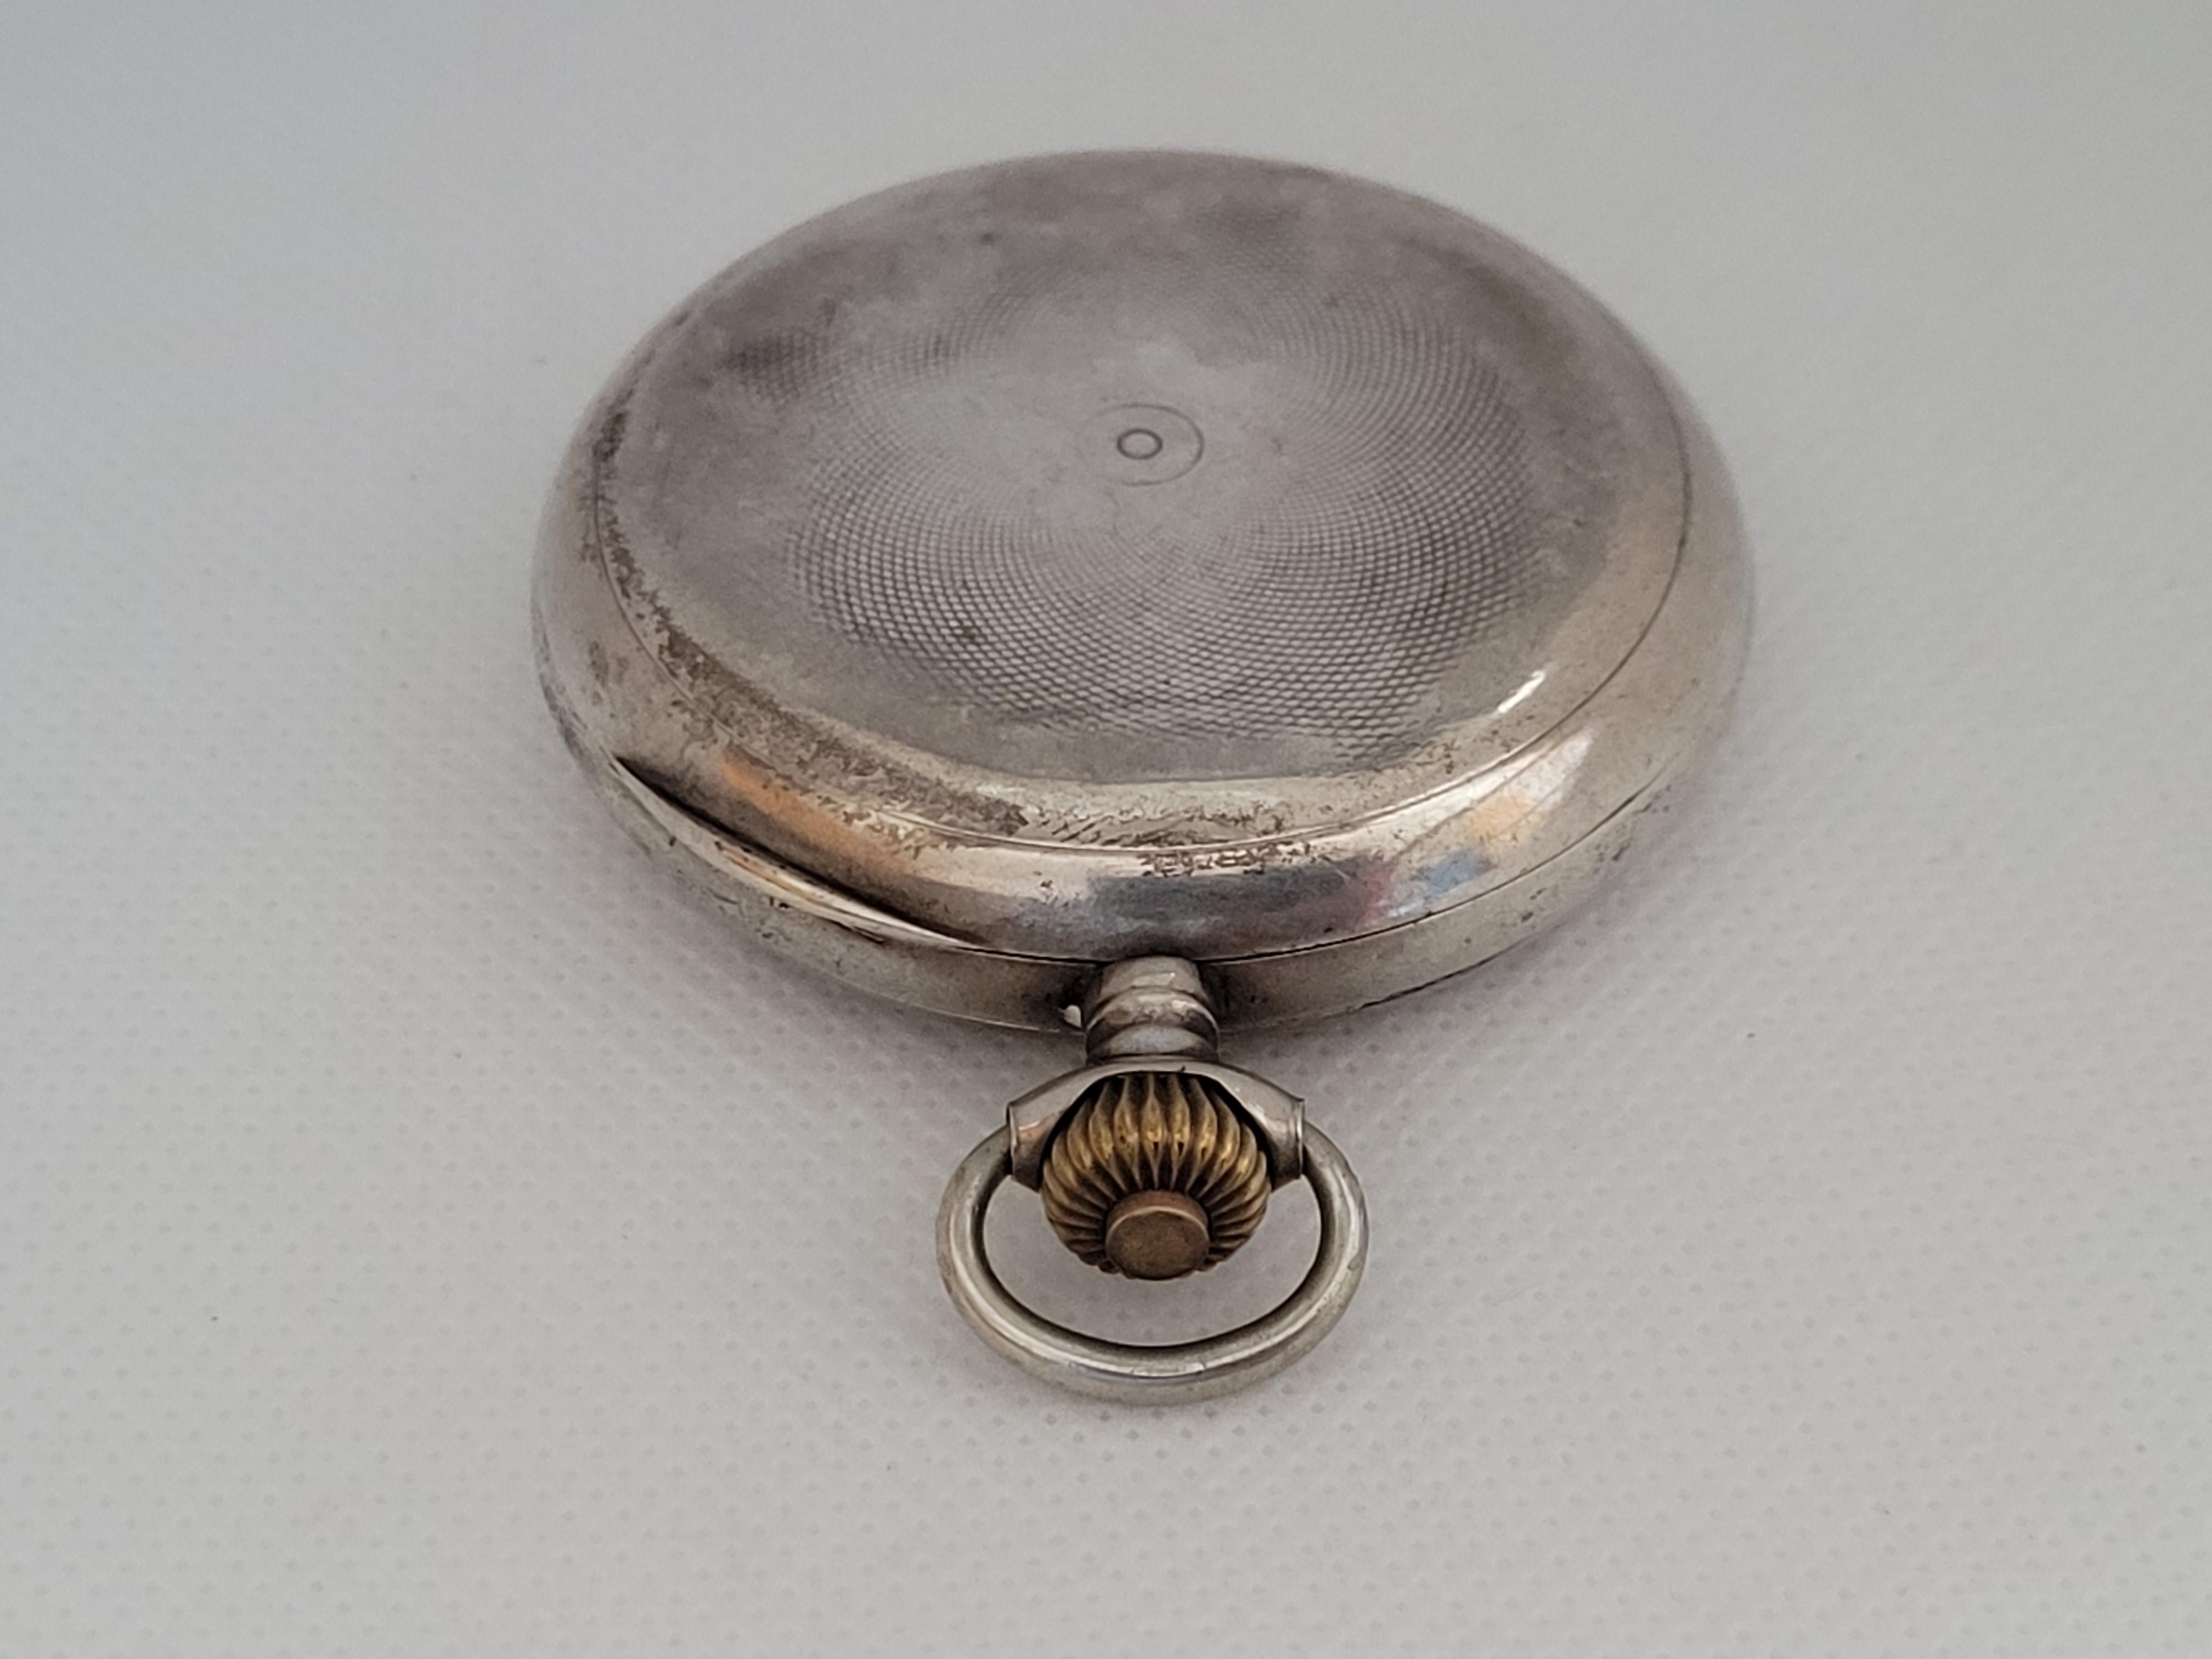 P Moser Pocket Watch Working Case Year 1910 Swiss Made 875 Silver For Sale 1